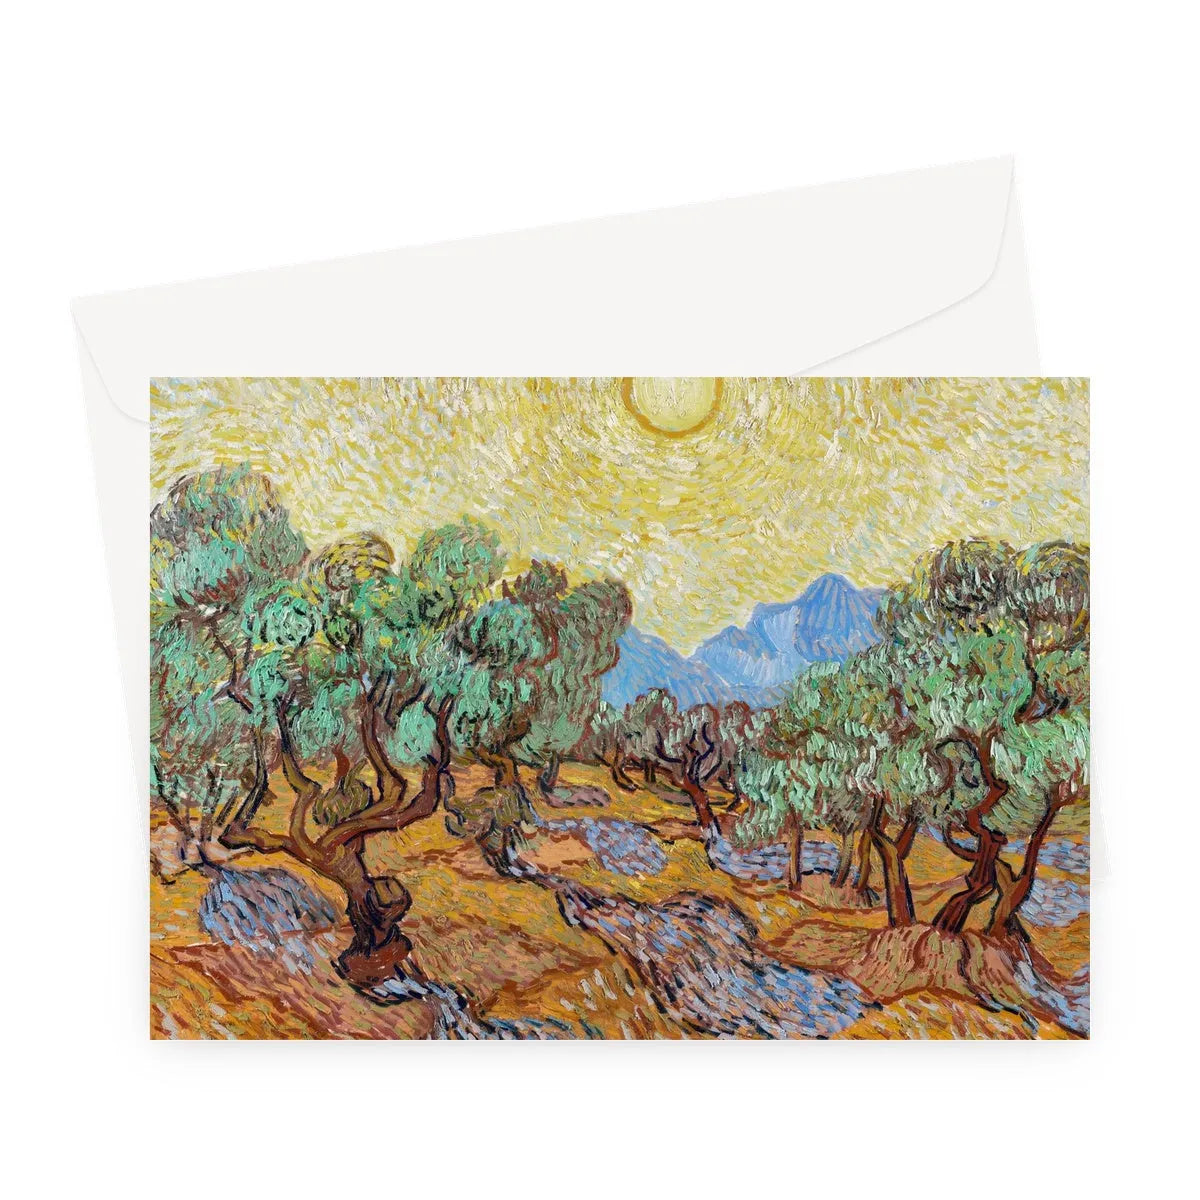 Olive Trees Too By Vincent Van Gogh Greeting Card - A5 Landscape / 10 Cards - Greeting & Note Cards - Aesthetic Art